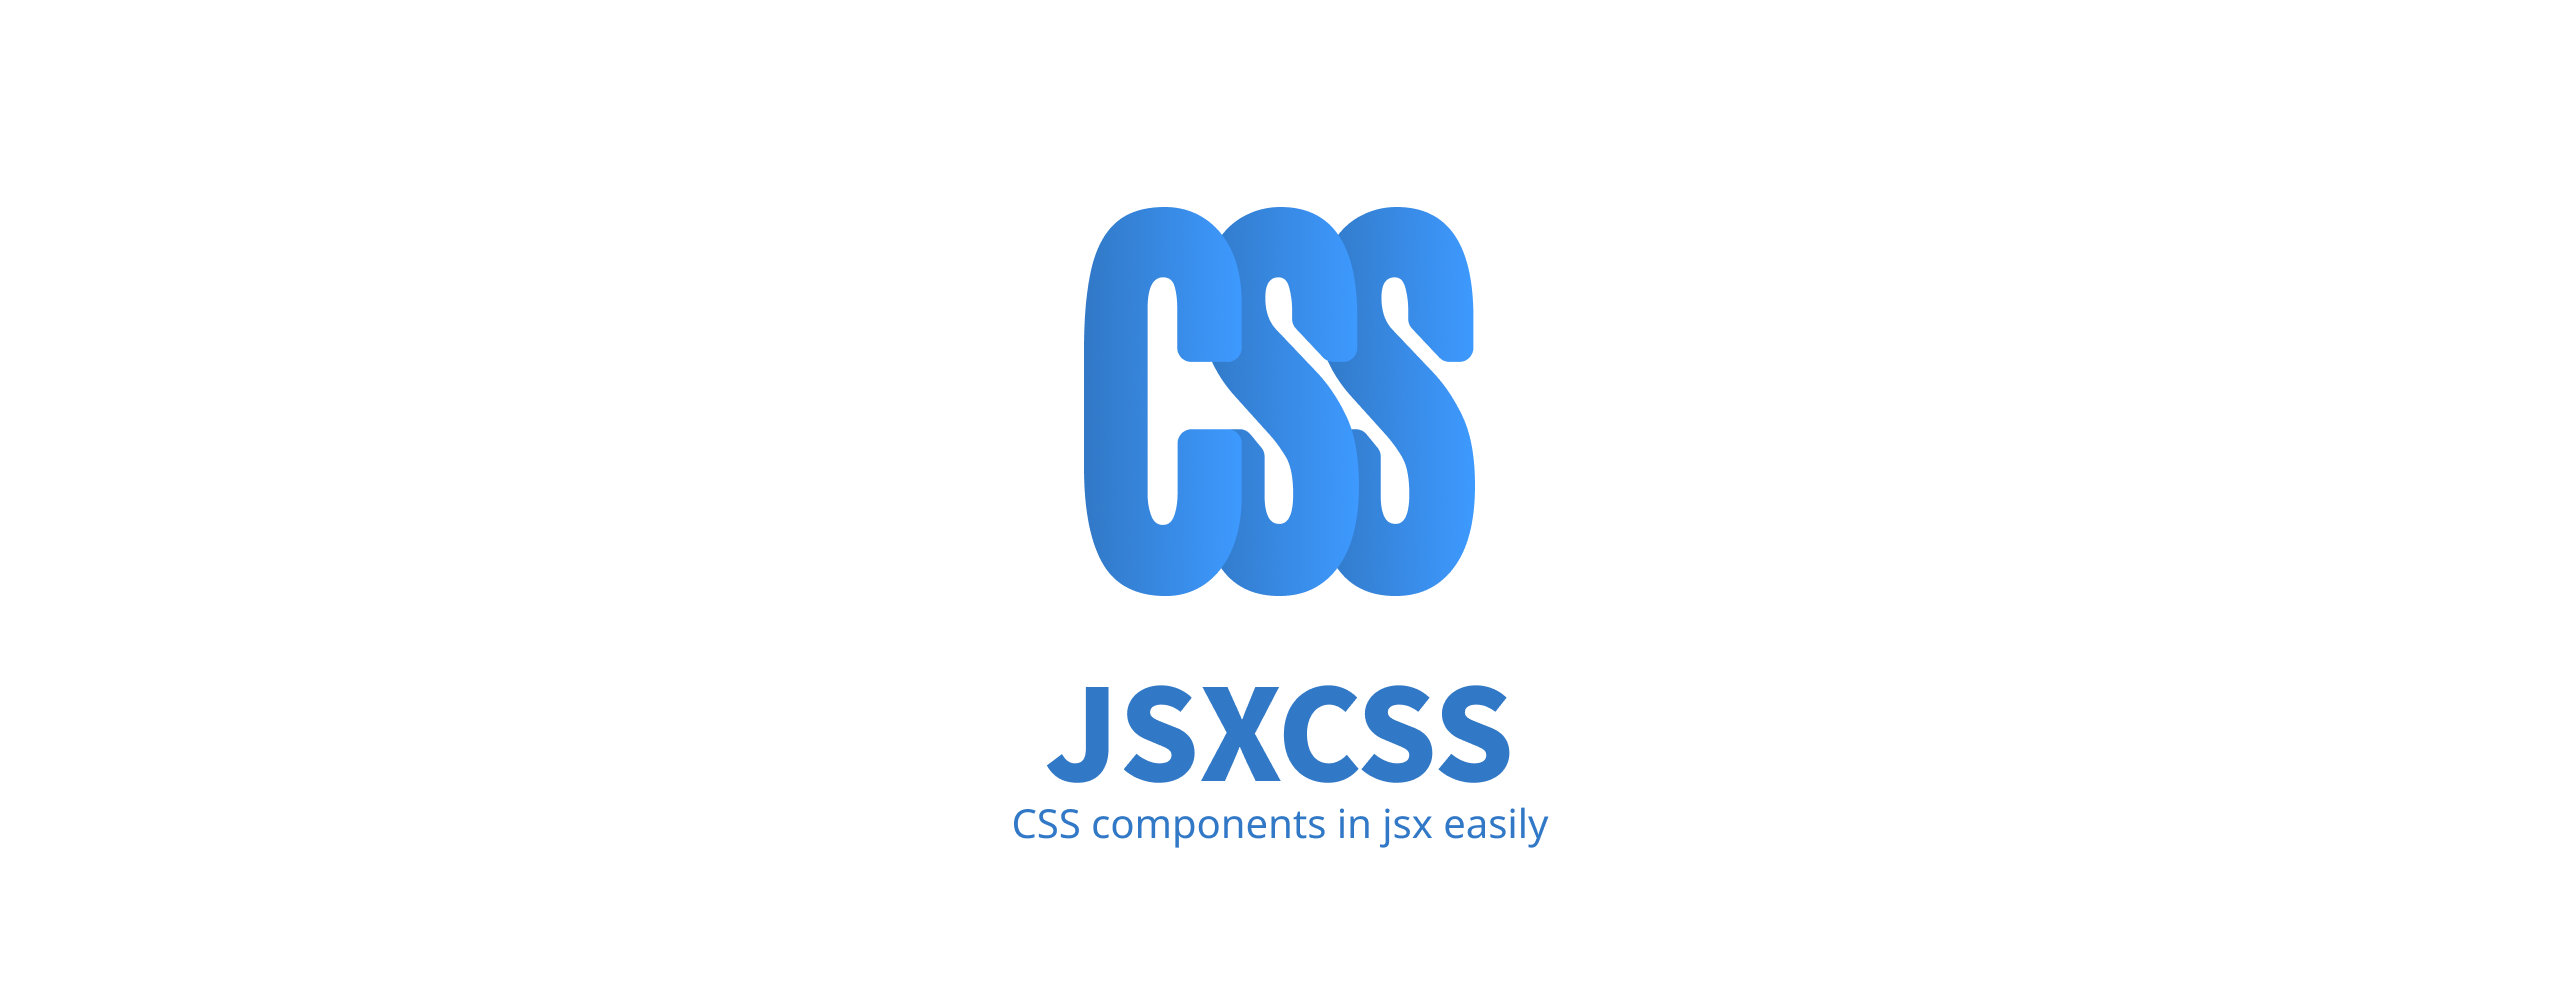 JSXCSS - Layout components for emotion easily